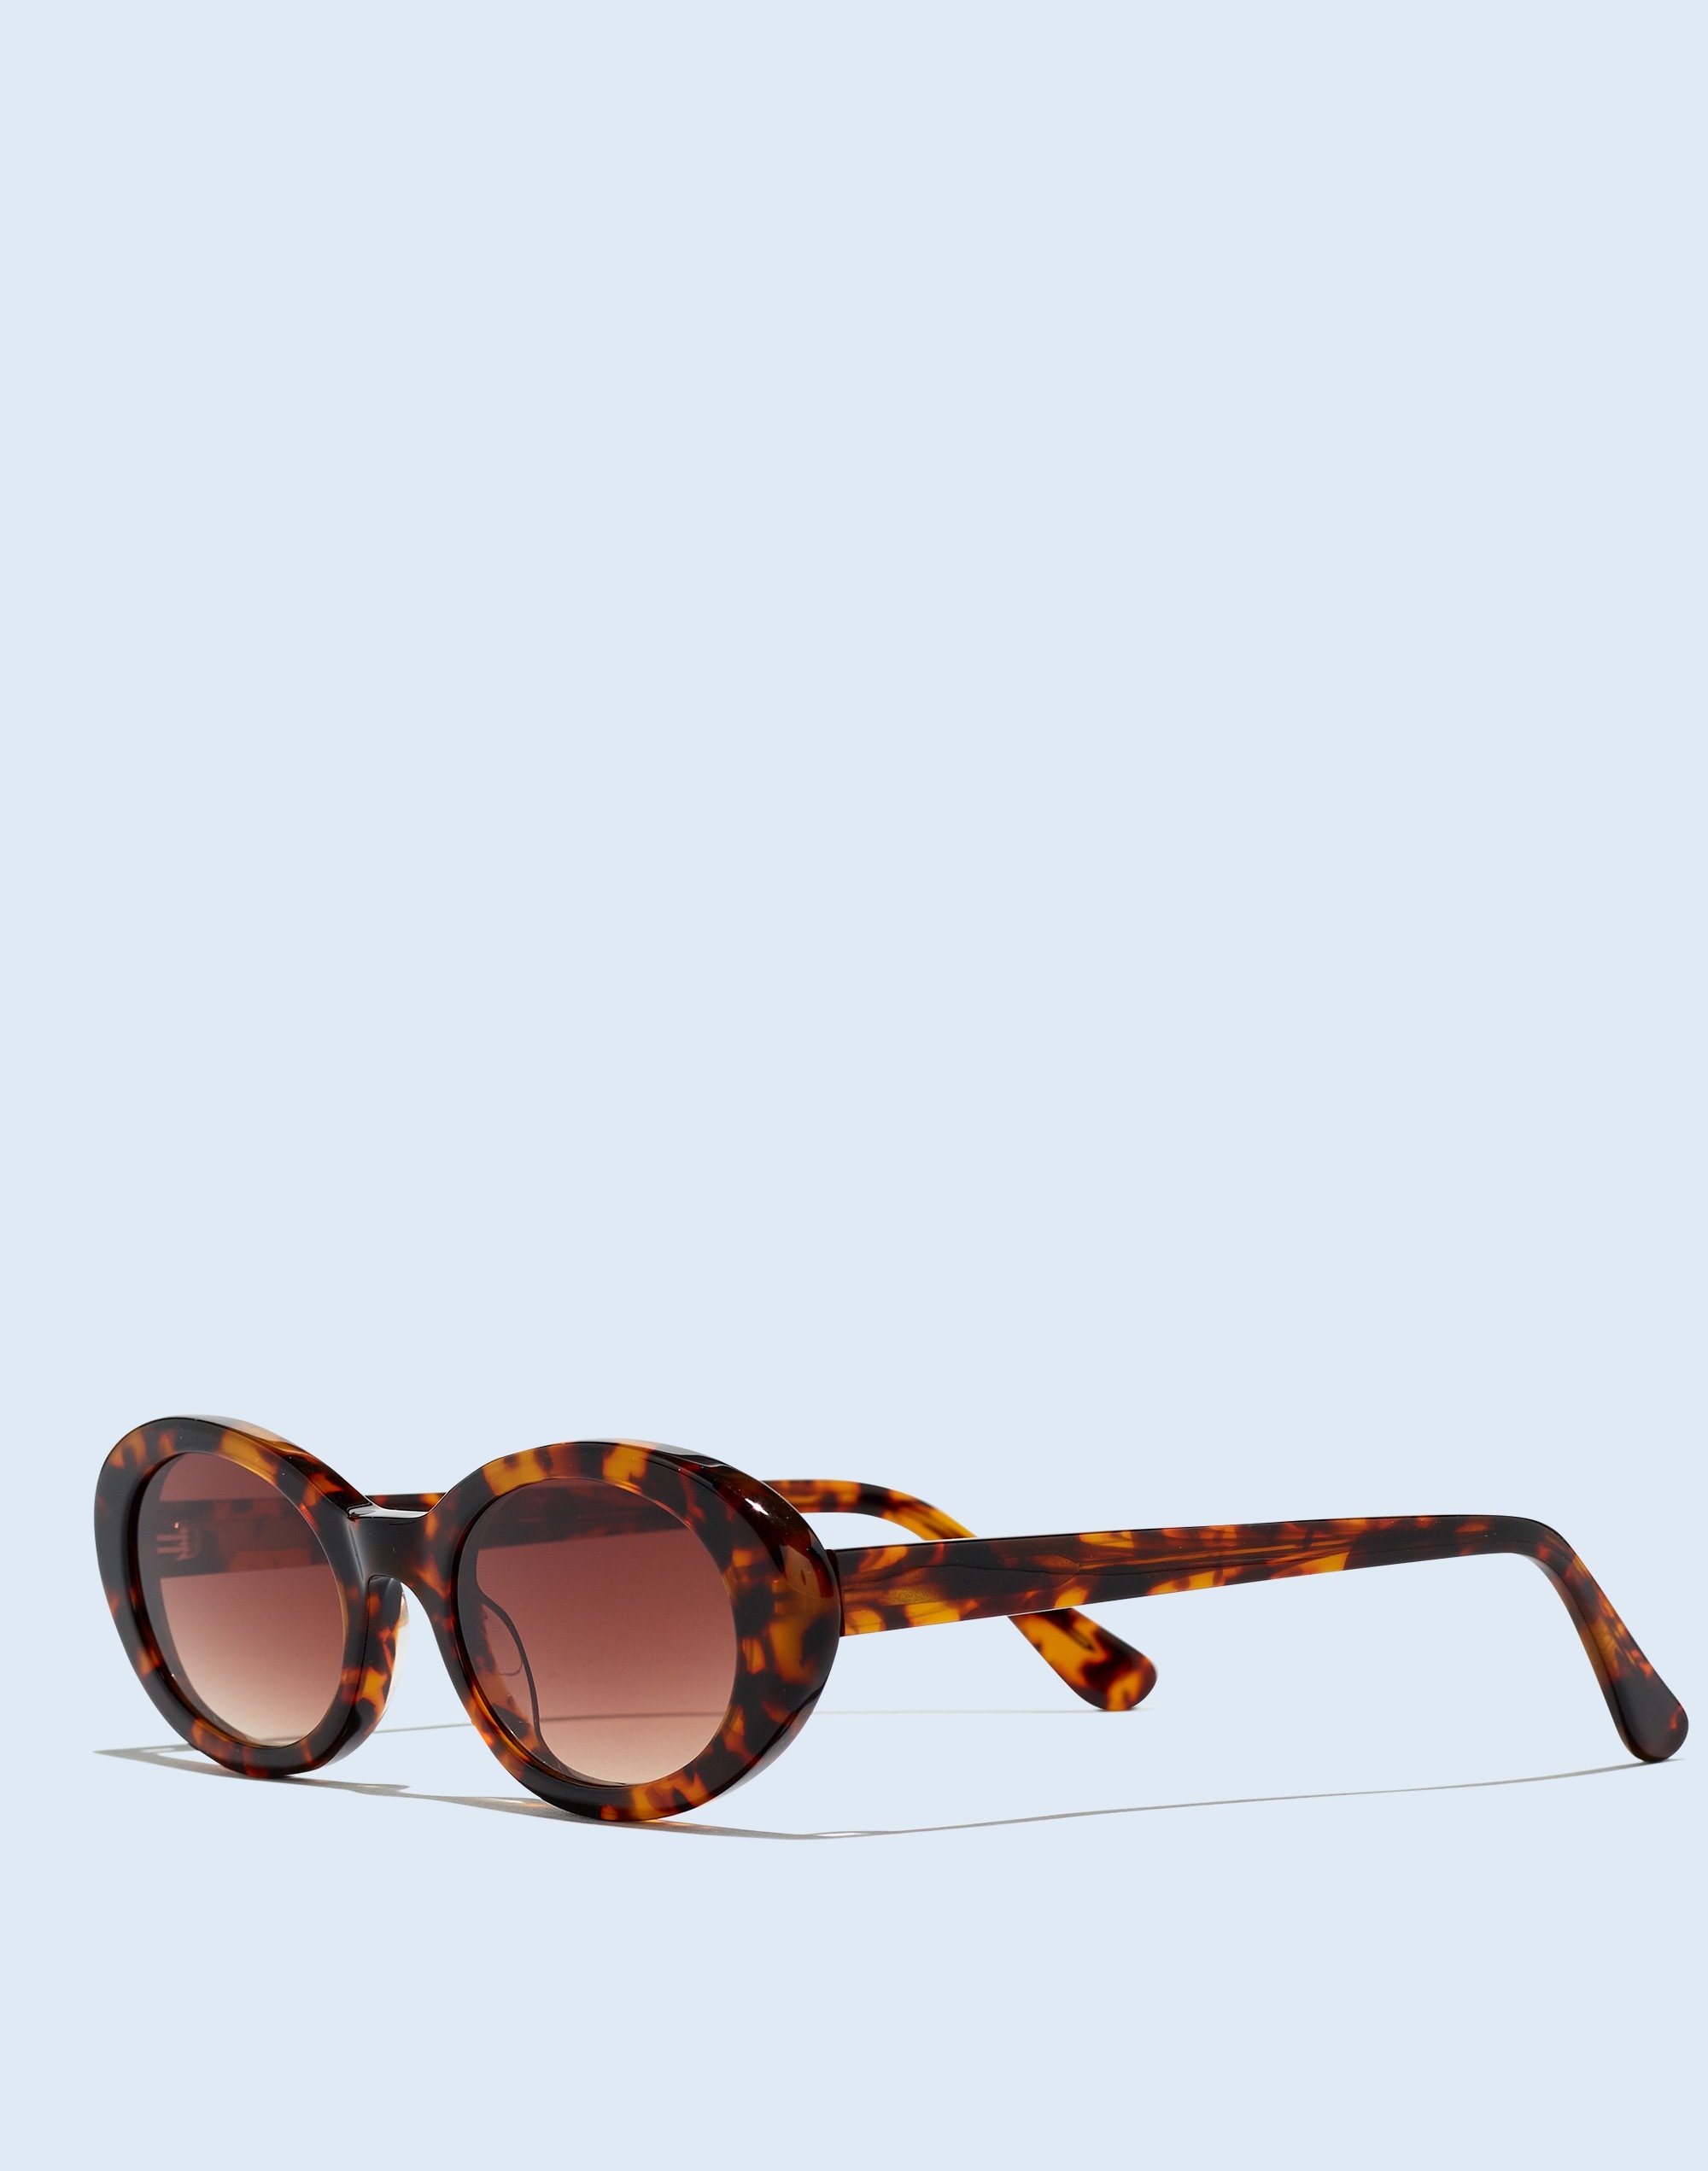 Mw Russell Oval Sunglasses In Afterglow Red Tort